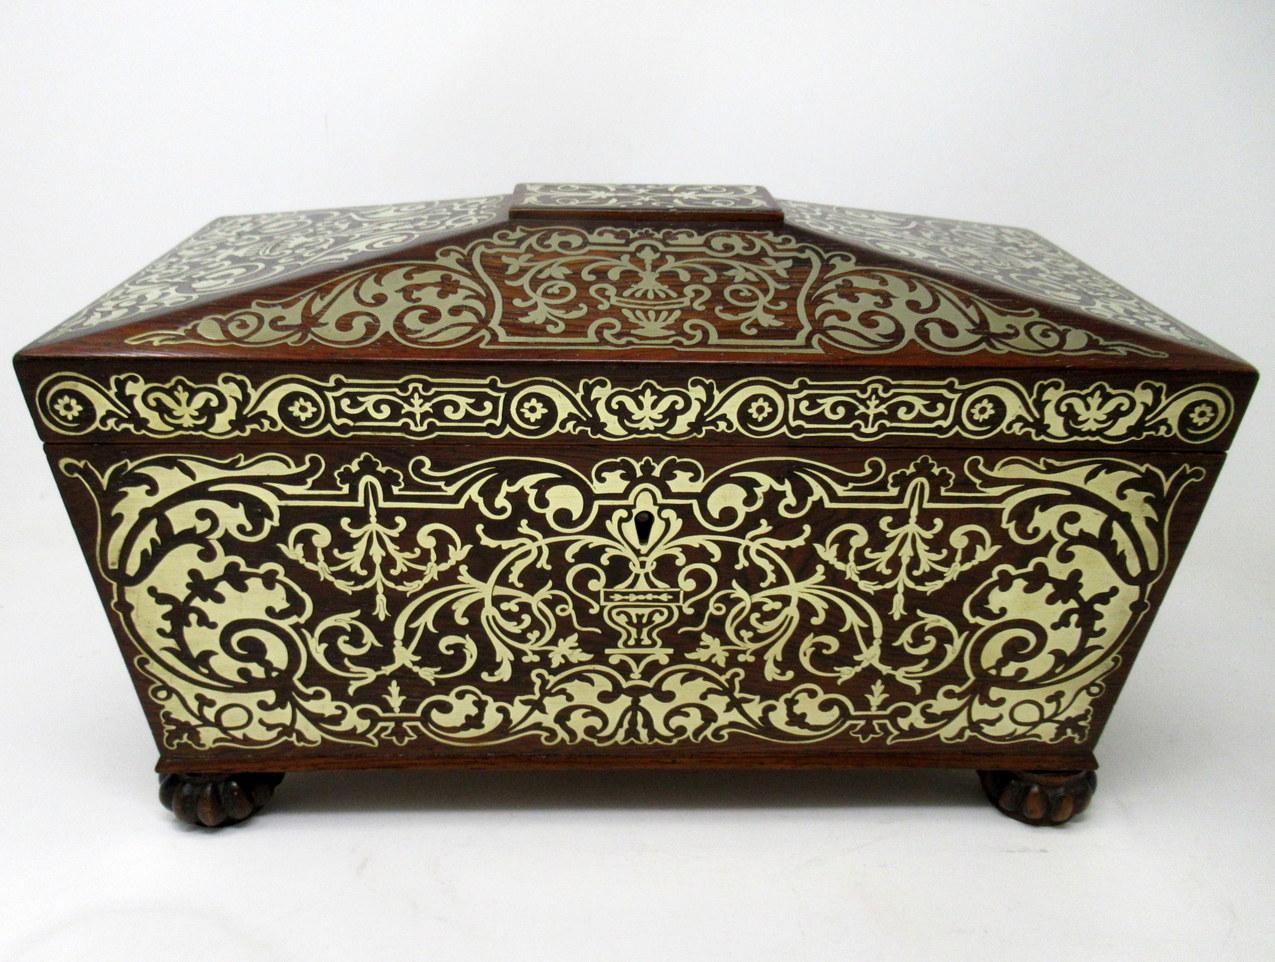 Antique Brass Inlaid Mahogany English Tea Caddy Box Regency Gillows Lancaster In Good Condition For Sale In Dublin, Ireland